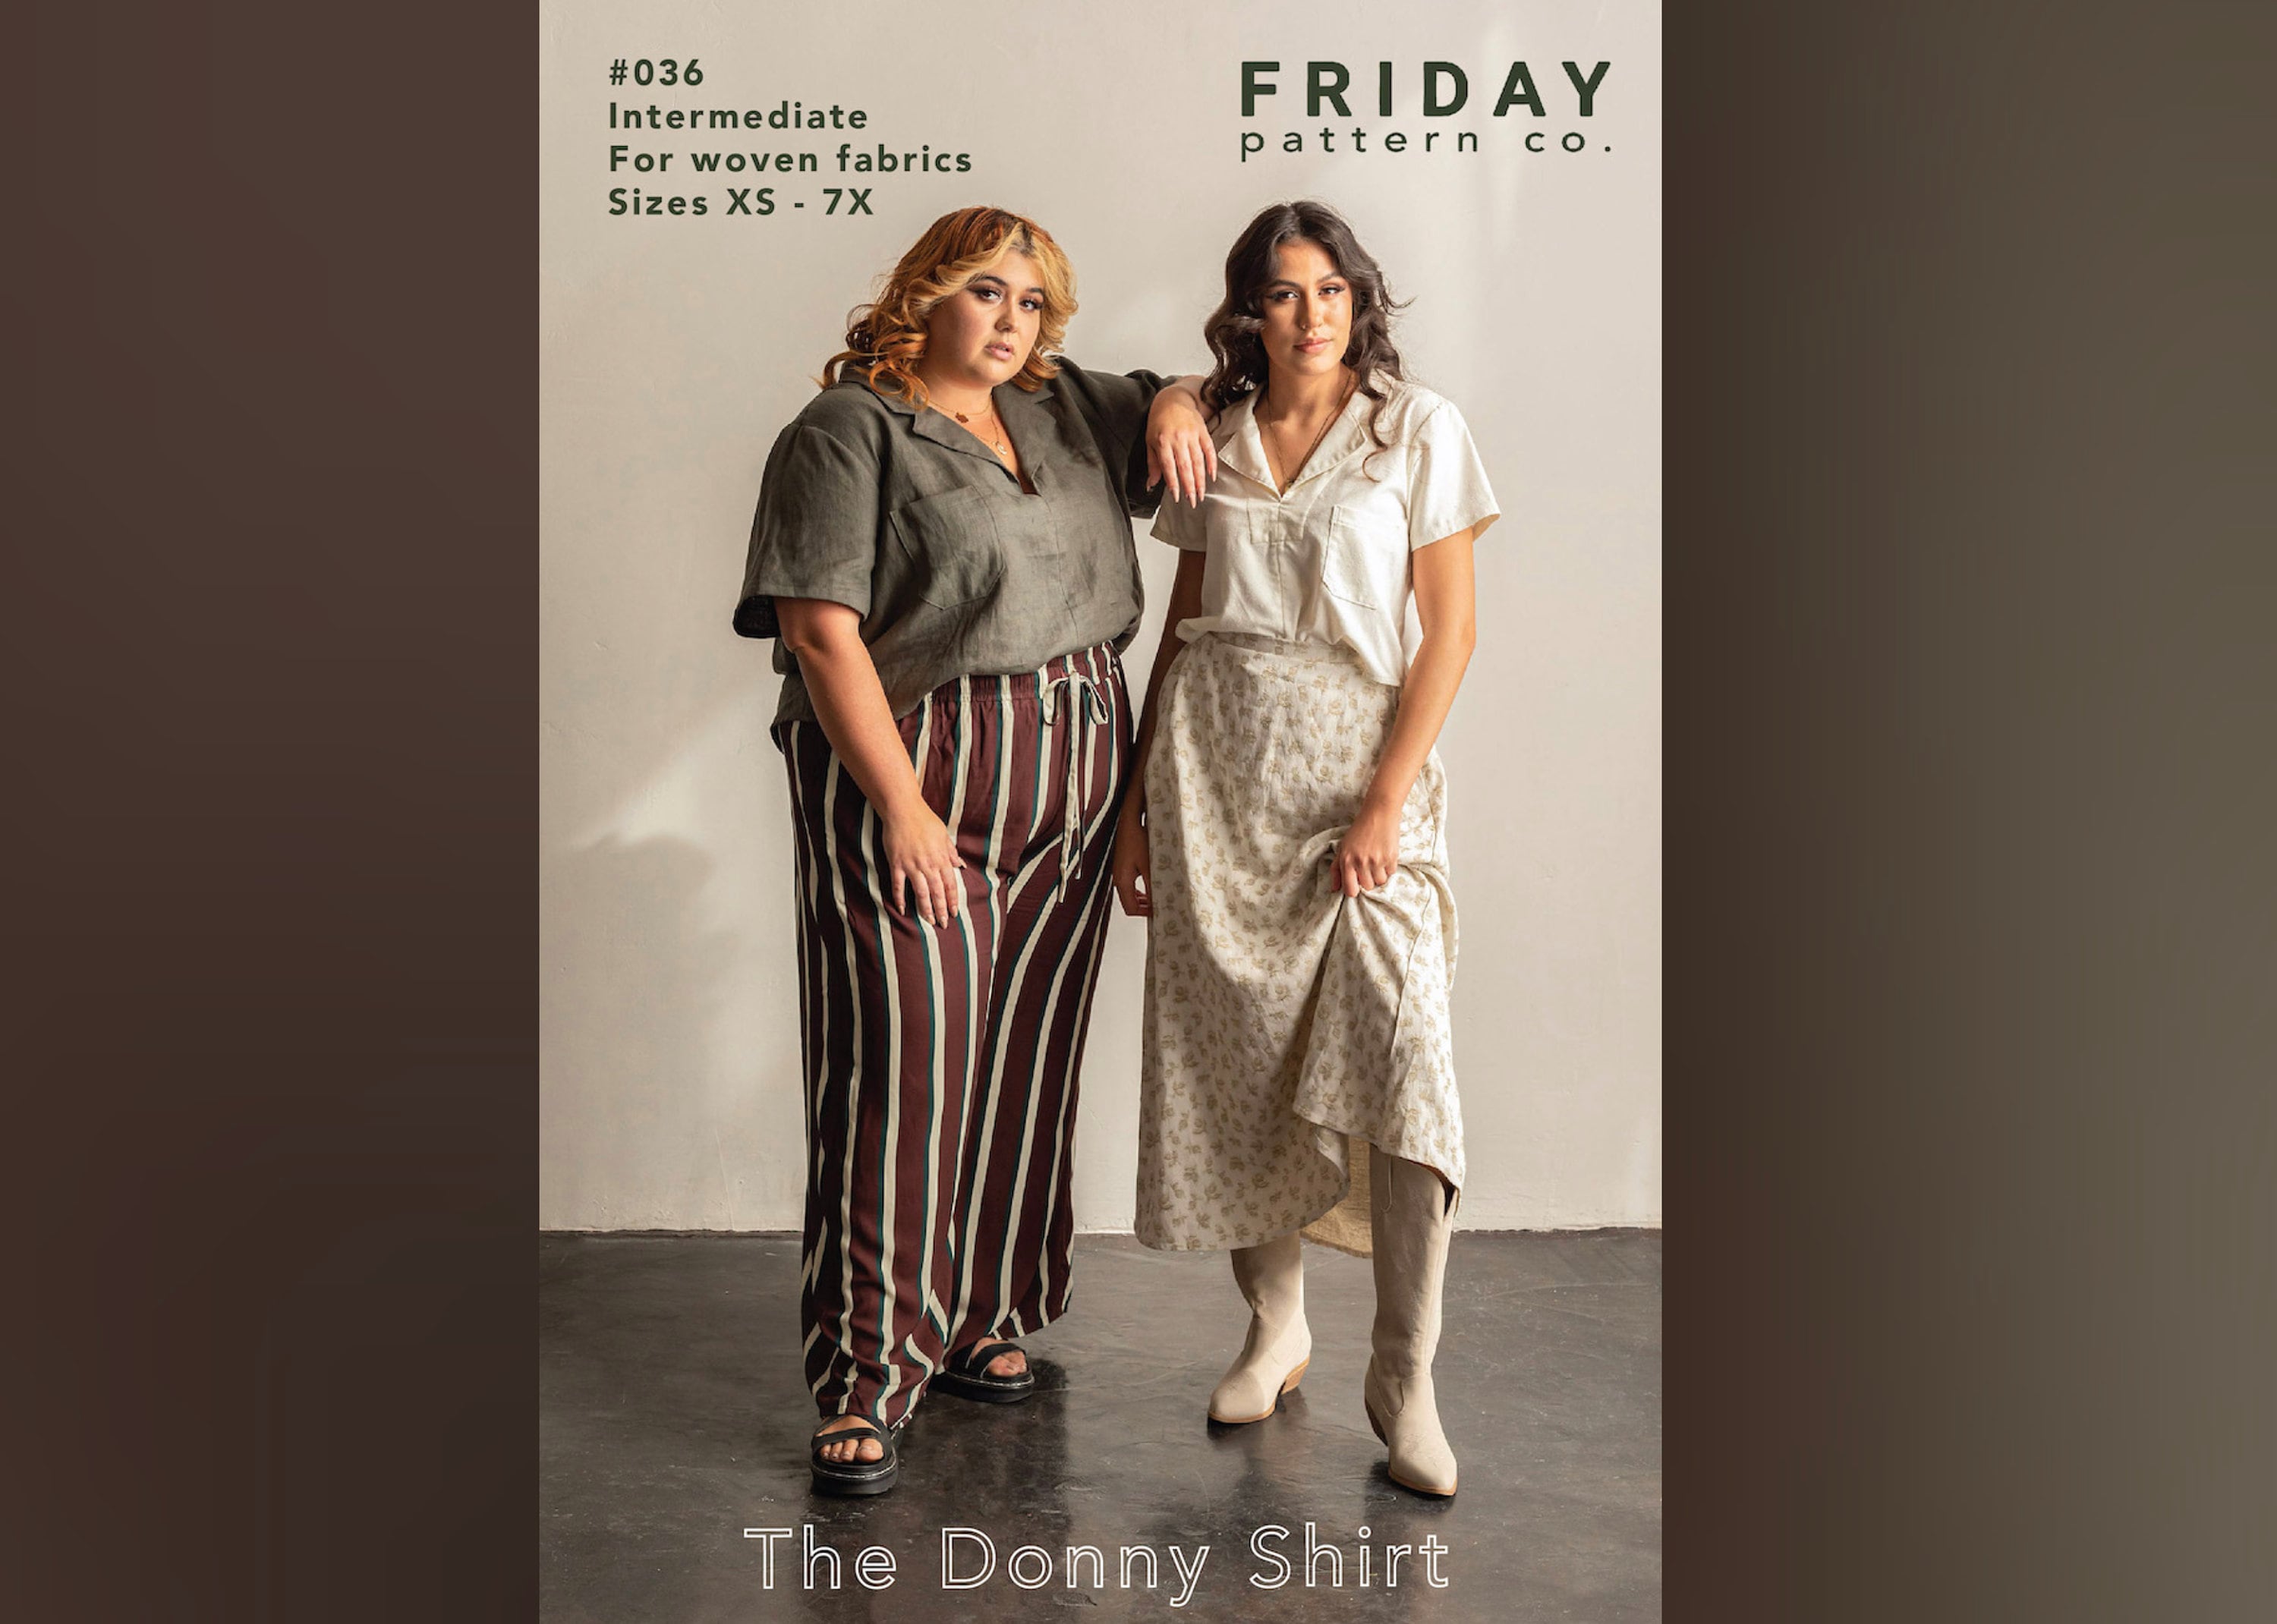 The Donny Shirt - Friday Pattern Co. - Sizes XS-7X